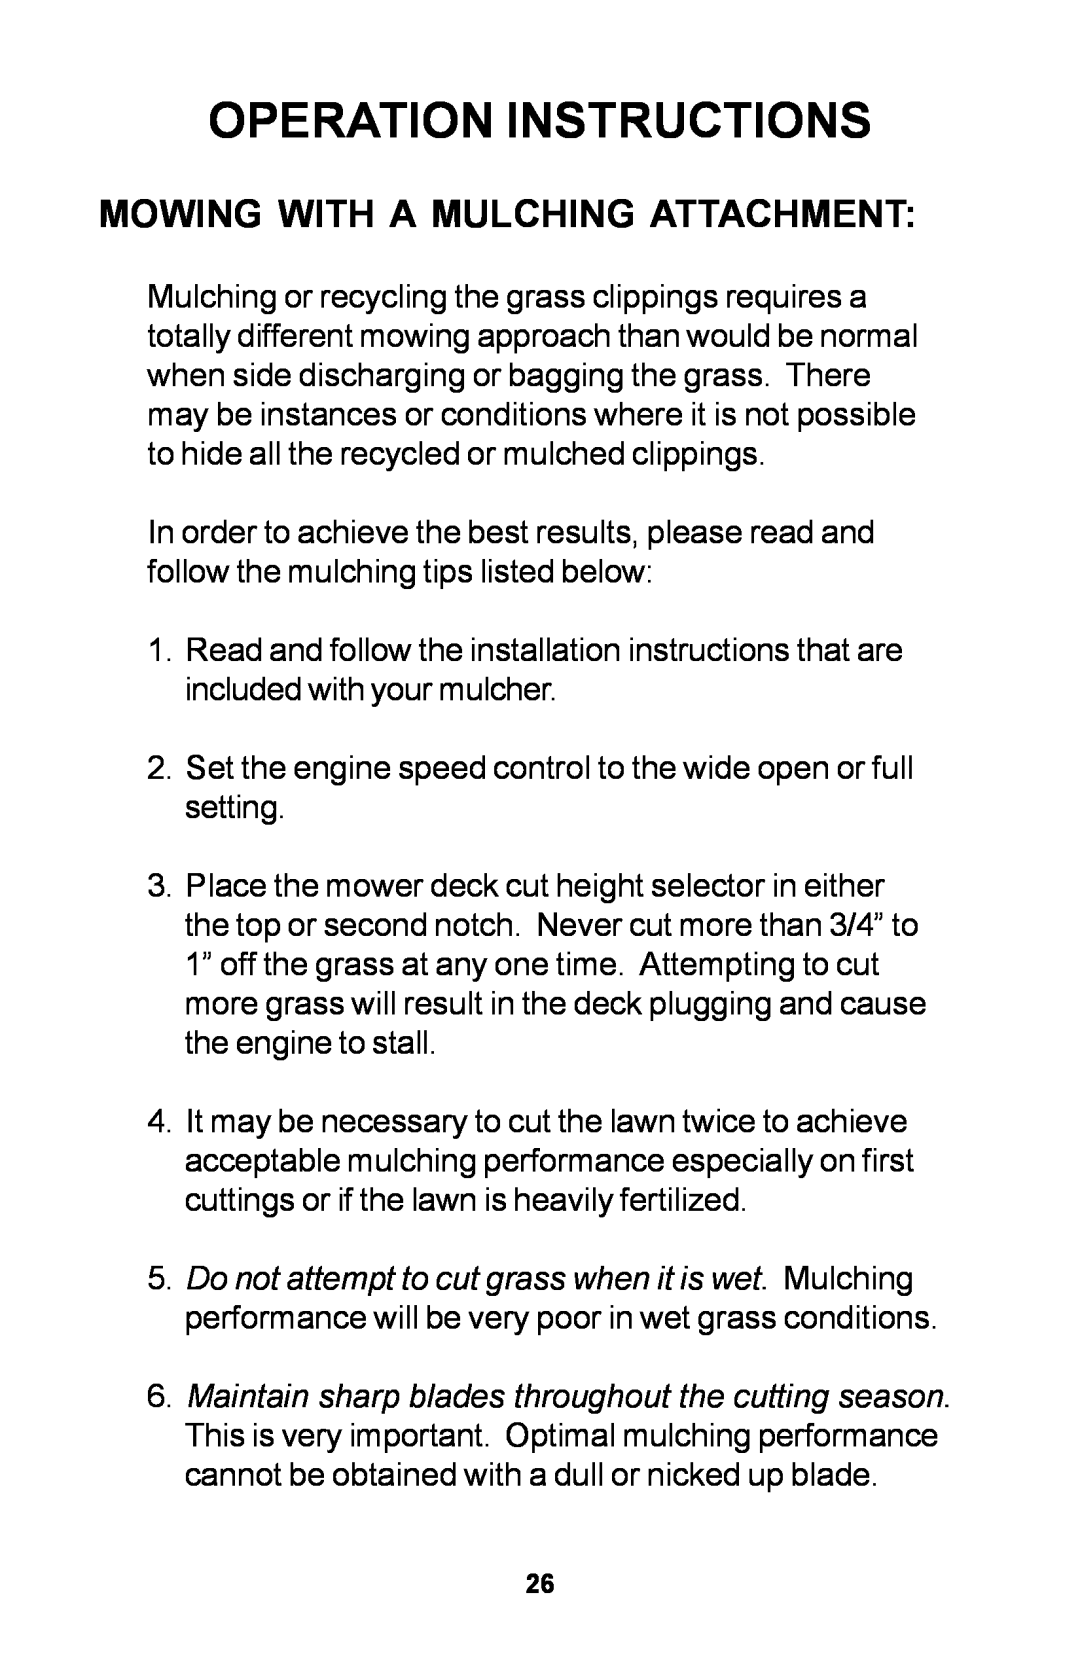 Dixon 30 manual Mowing With A Mulching Attachment, Operation Instructions 